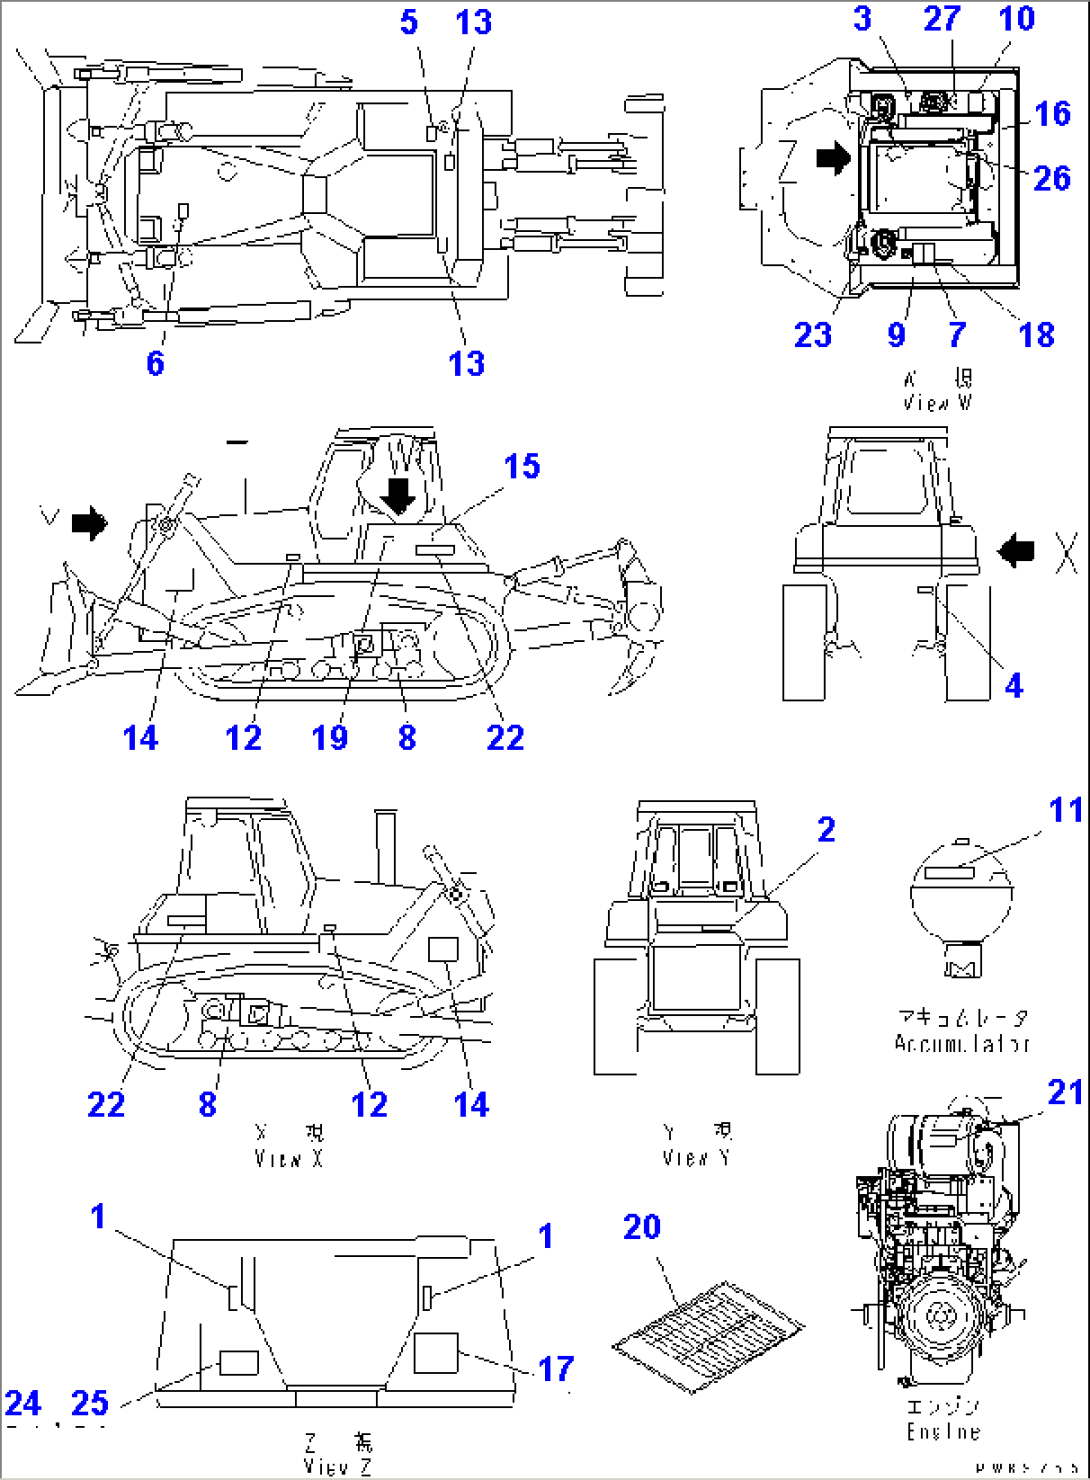 MARKS AND PLATES (PORTUGUESE)(#70001-74999)